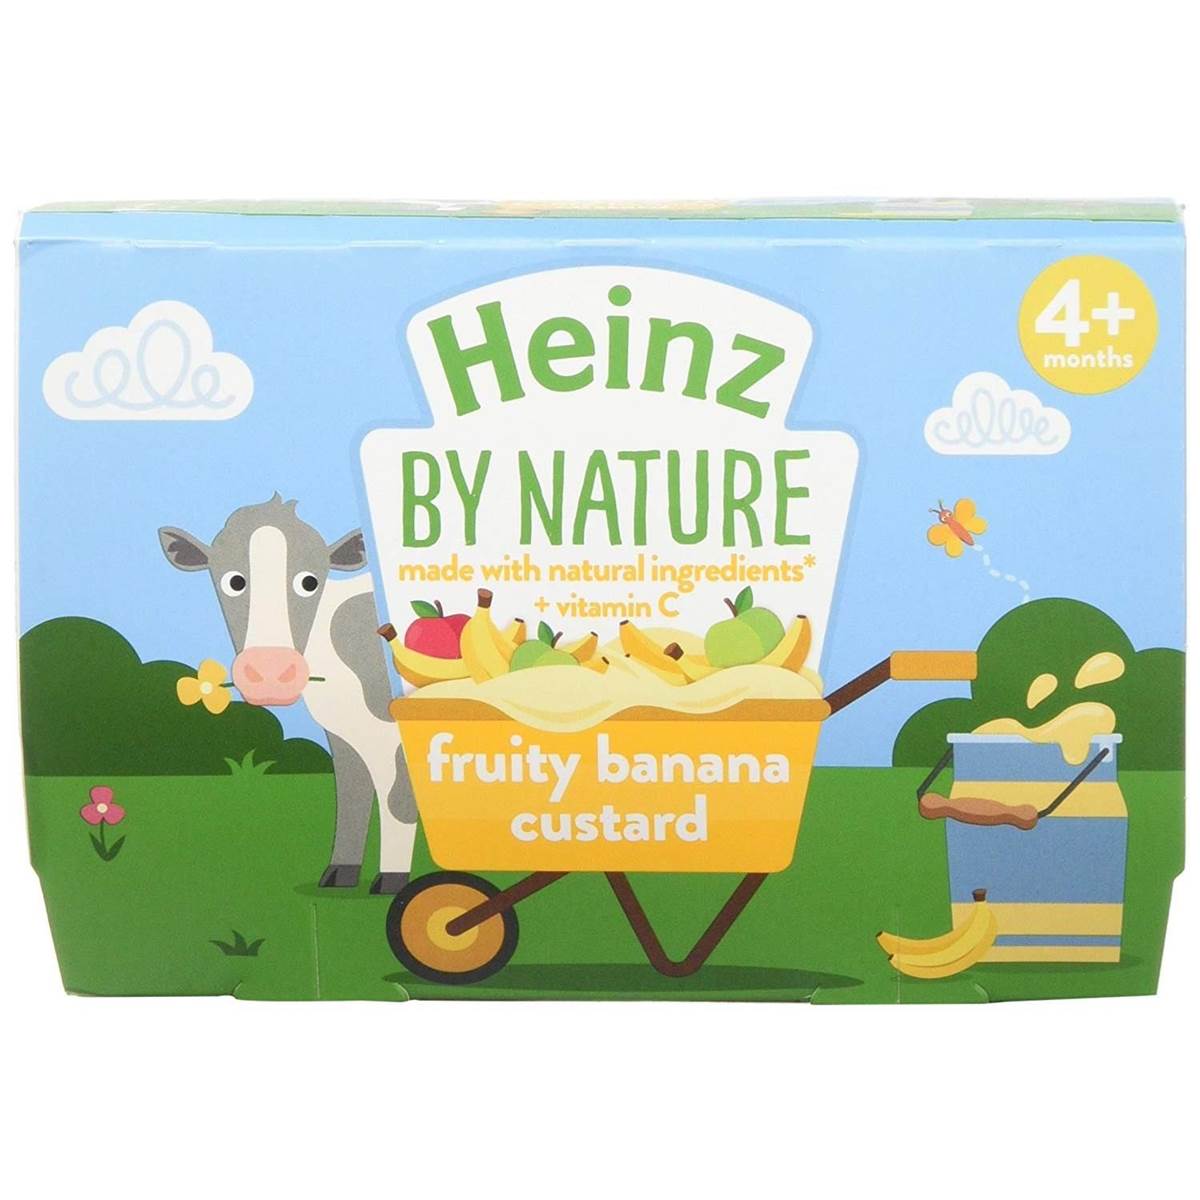 Heinz by Nature Fruity Banana Custrad (Pack of 4) - 400g (4x100g)